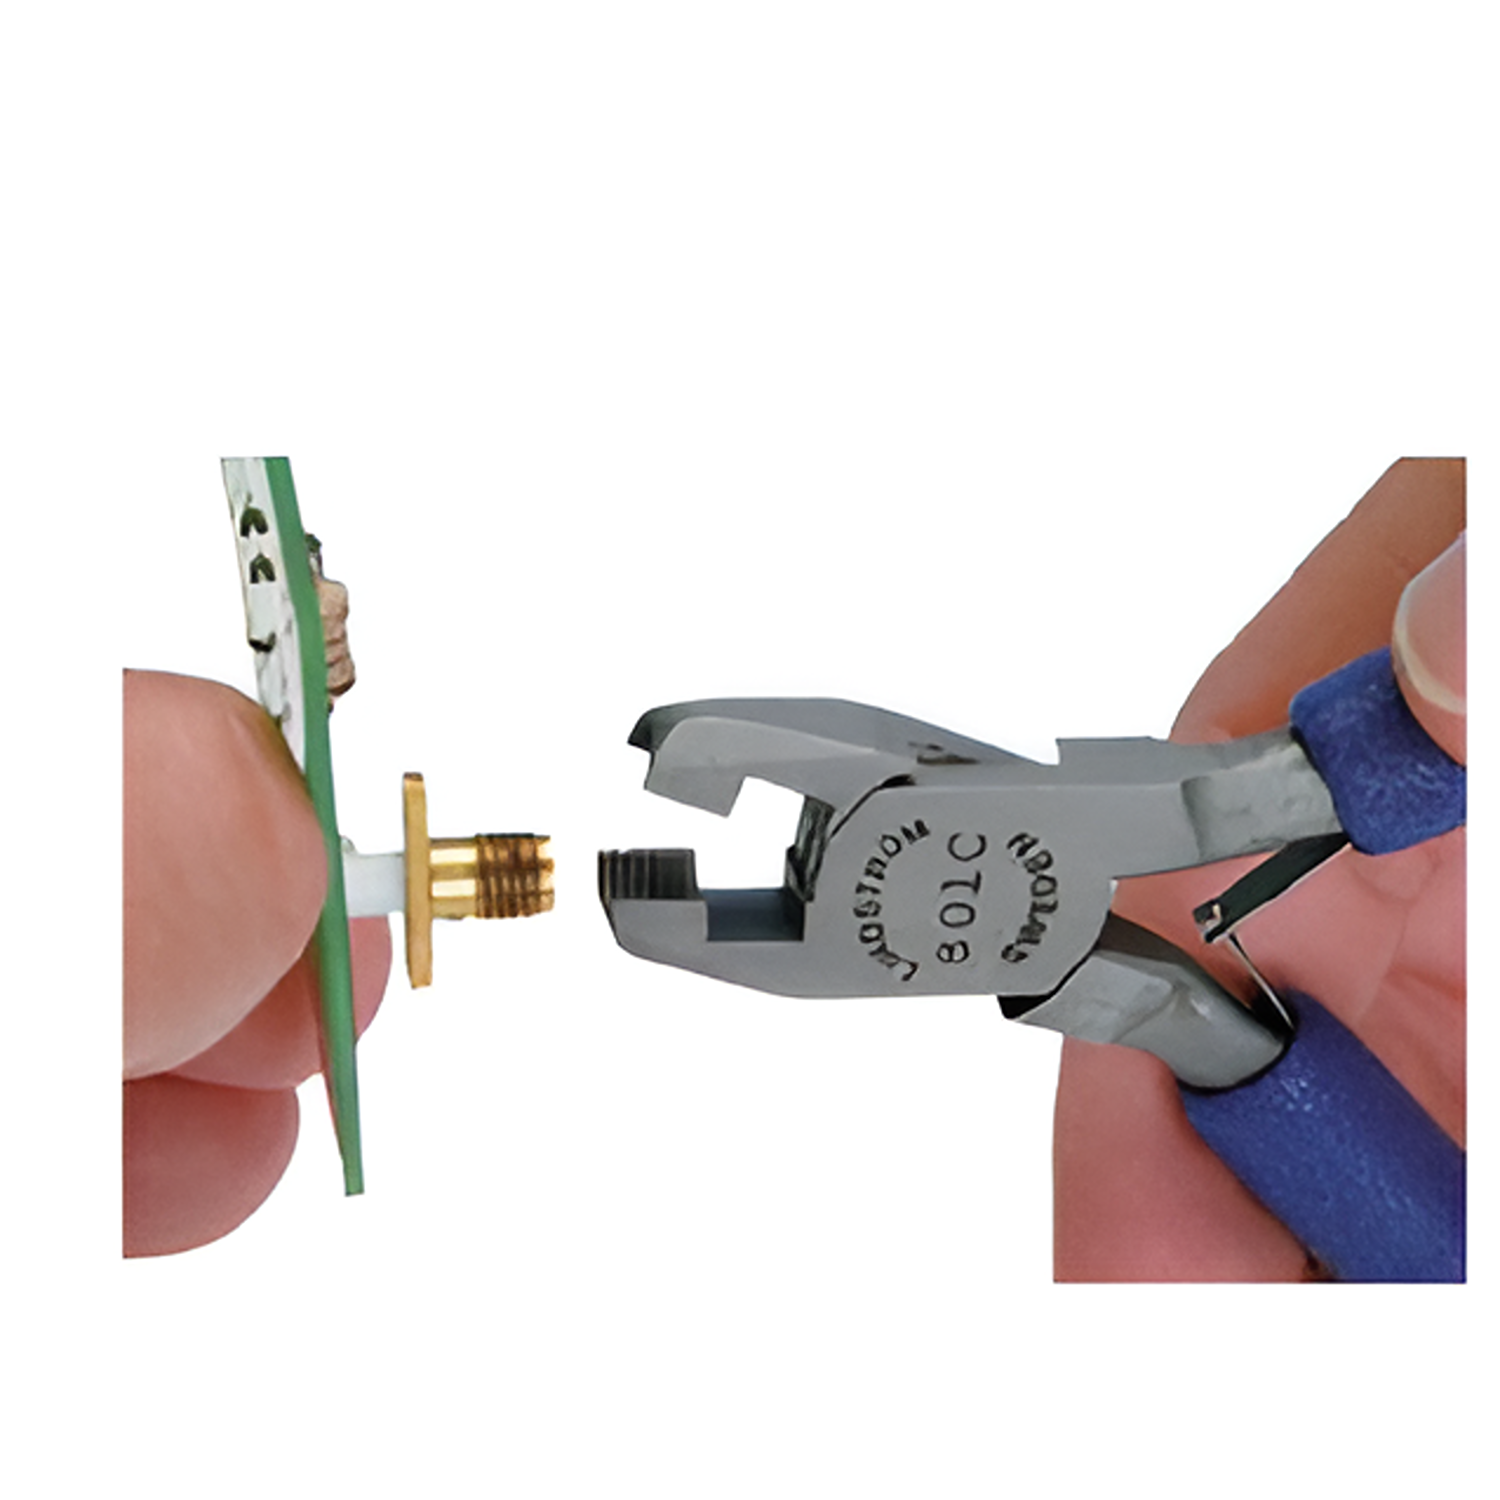 BAHCO 801C Specials, Coaxial Cable Connector Tool Cutters - Premium Coaxial Cable Connector Tool from BAHCO - Shop now at Yew Aik.